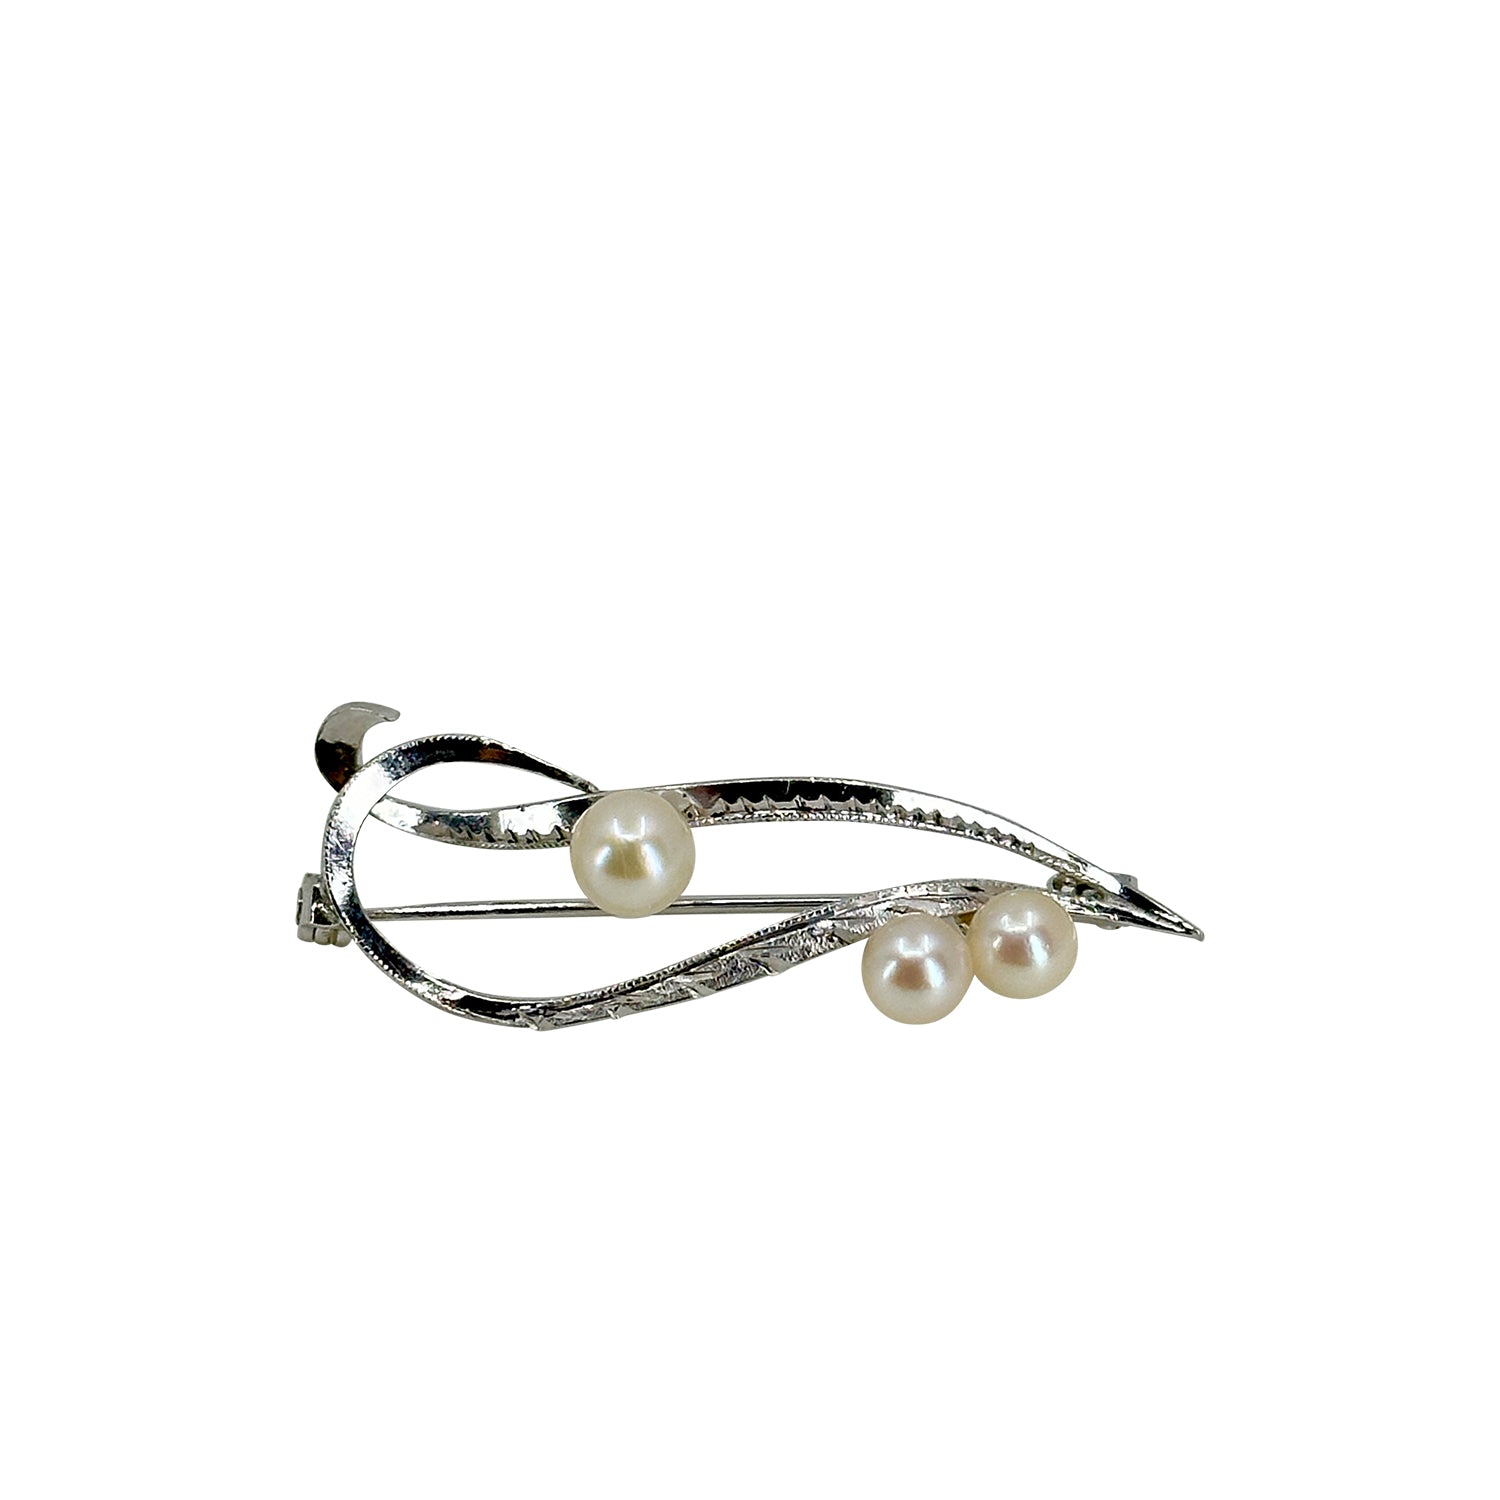 Lightweight Engraved Mid Century Japanese Saltwater Akoya Cultured Pearl Brooch- Sterling Silver